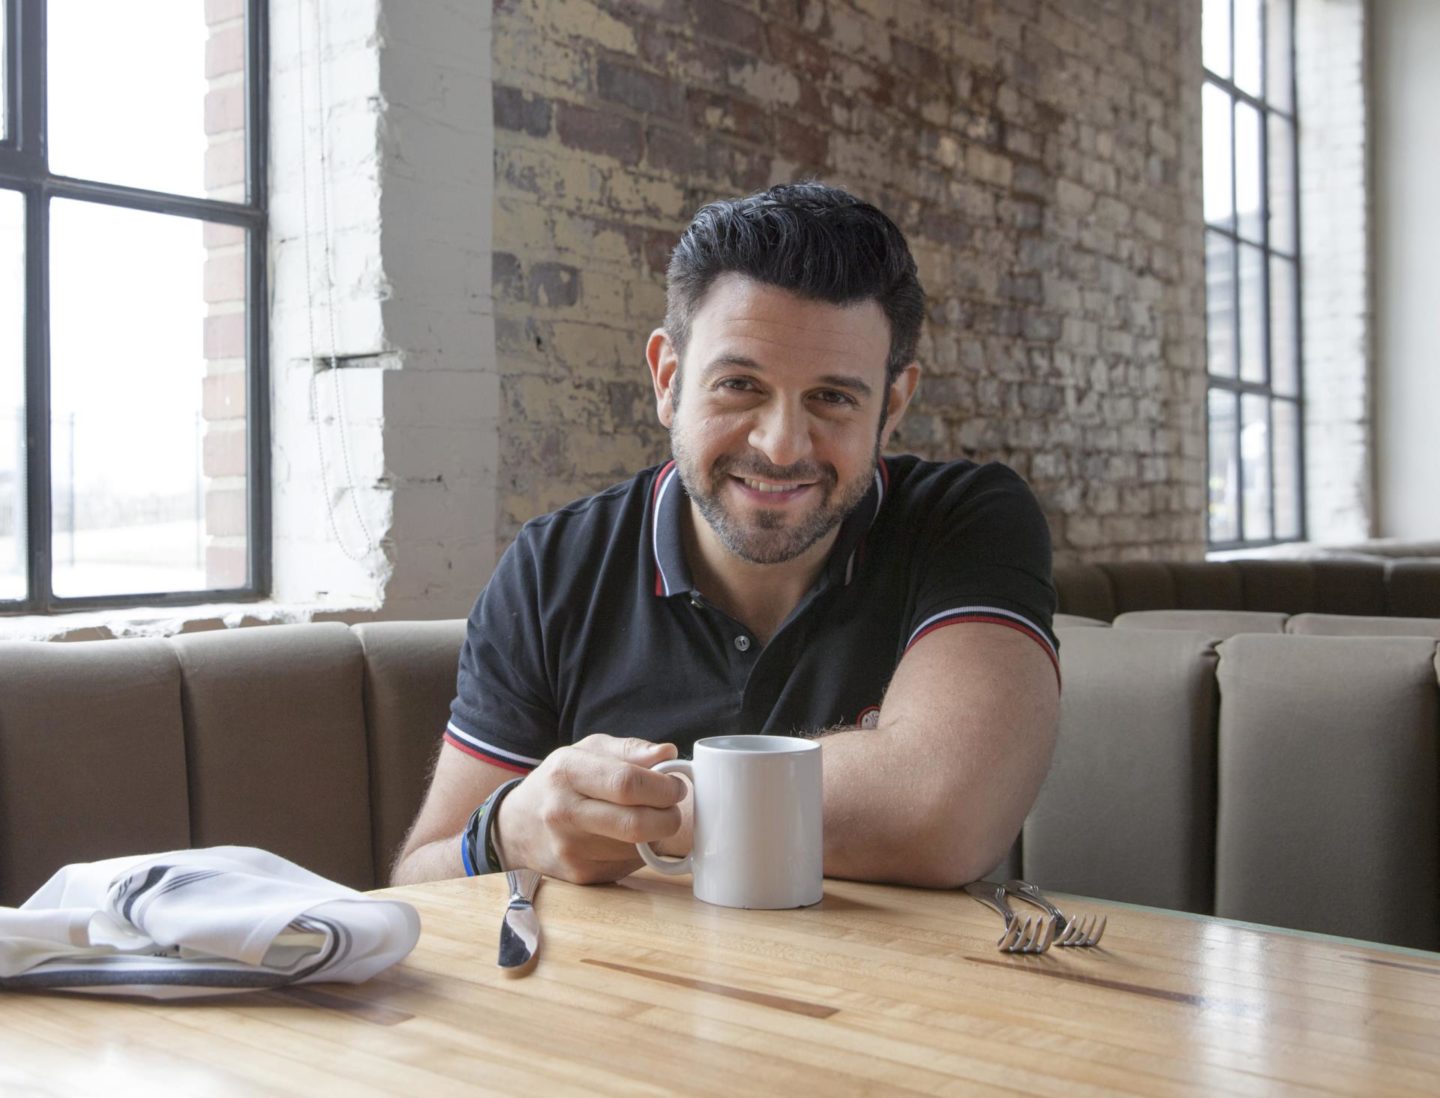 ADAM RICHMAN: MY DIET IS NONE OF YOUR BUSINESS